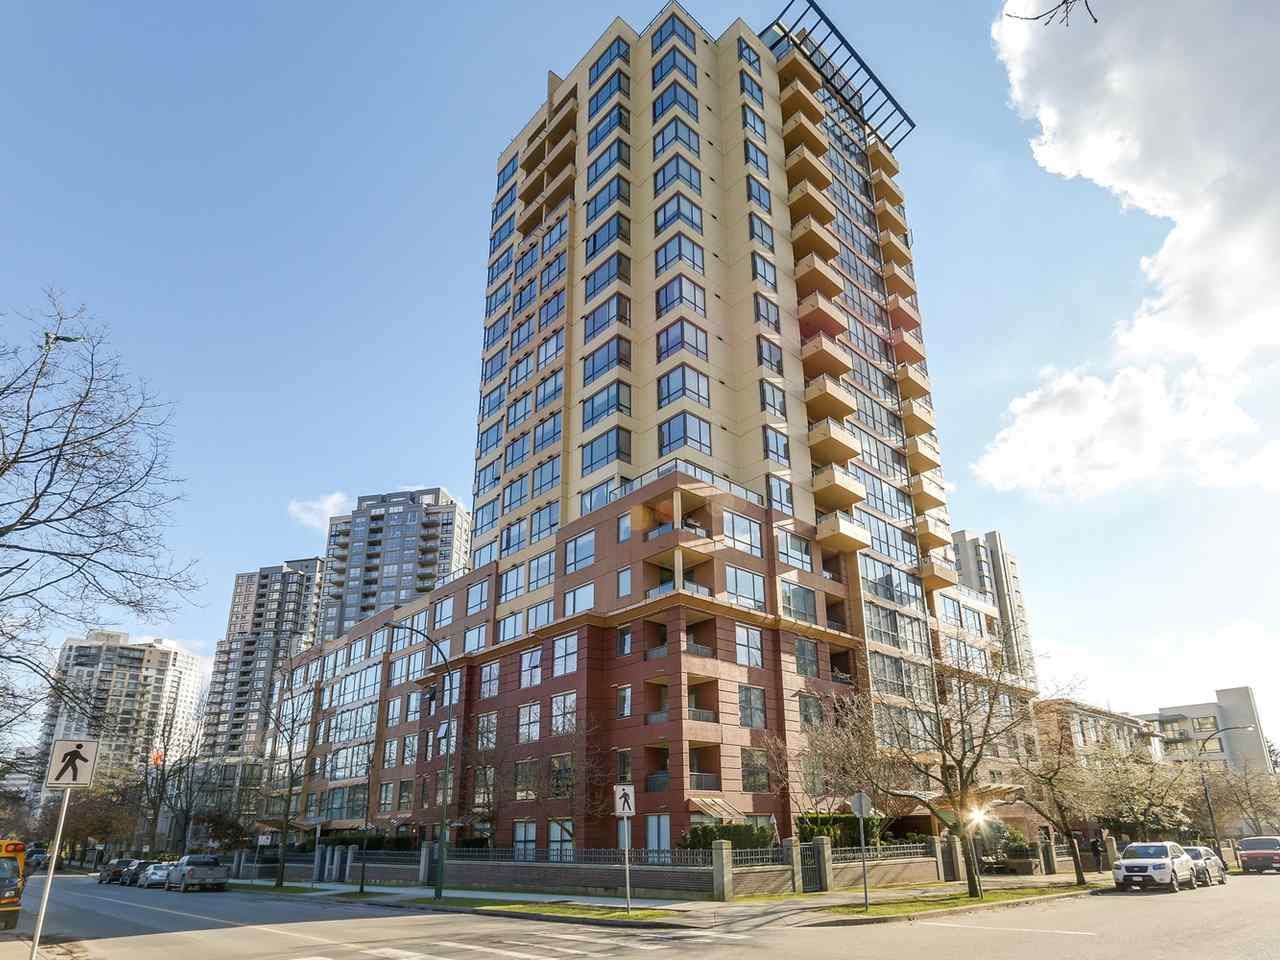 Main Photo: 809 5288 MELBOURNE Street in Vancouver: Collingwood VE Condo for sale (Vancouver East)  : MLS®# R2141801